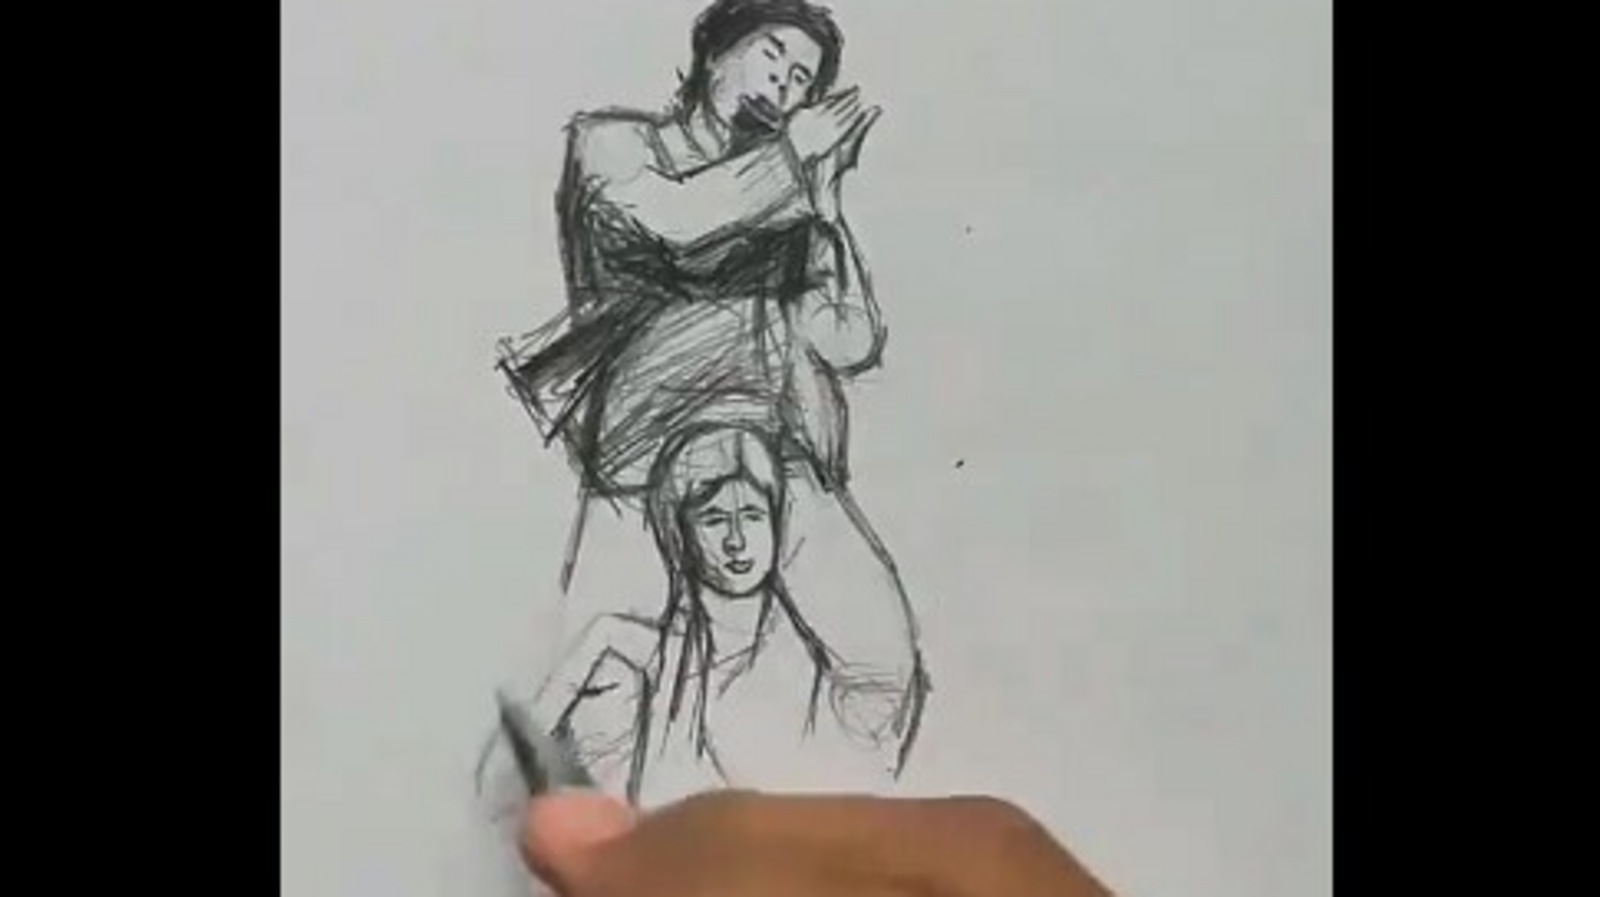 Dharmendra shares video of artist drawing scene featuring him ...